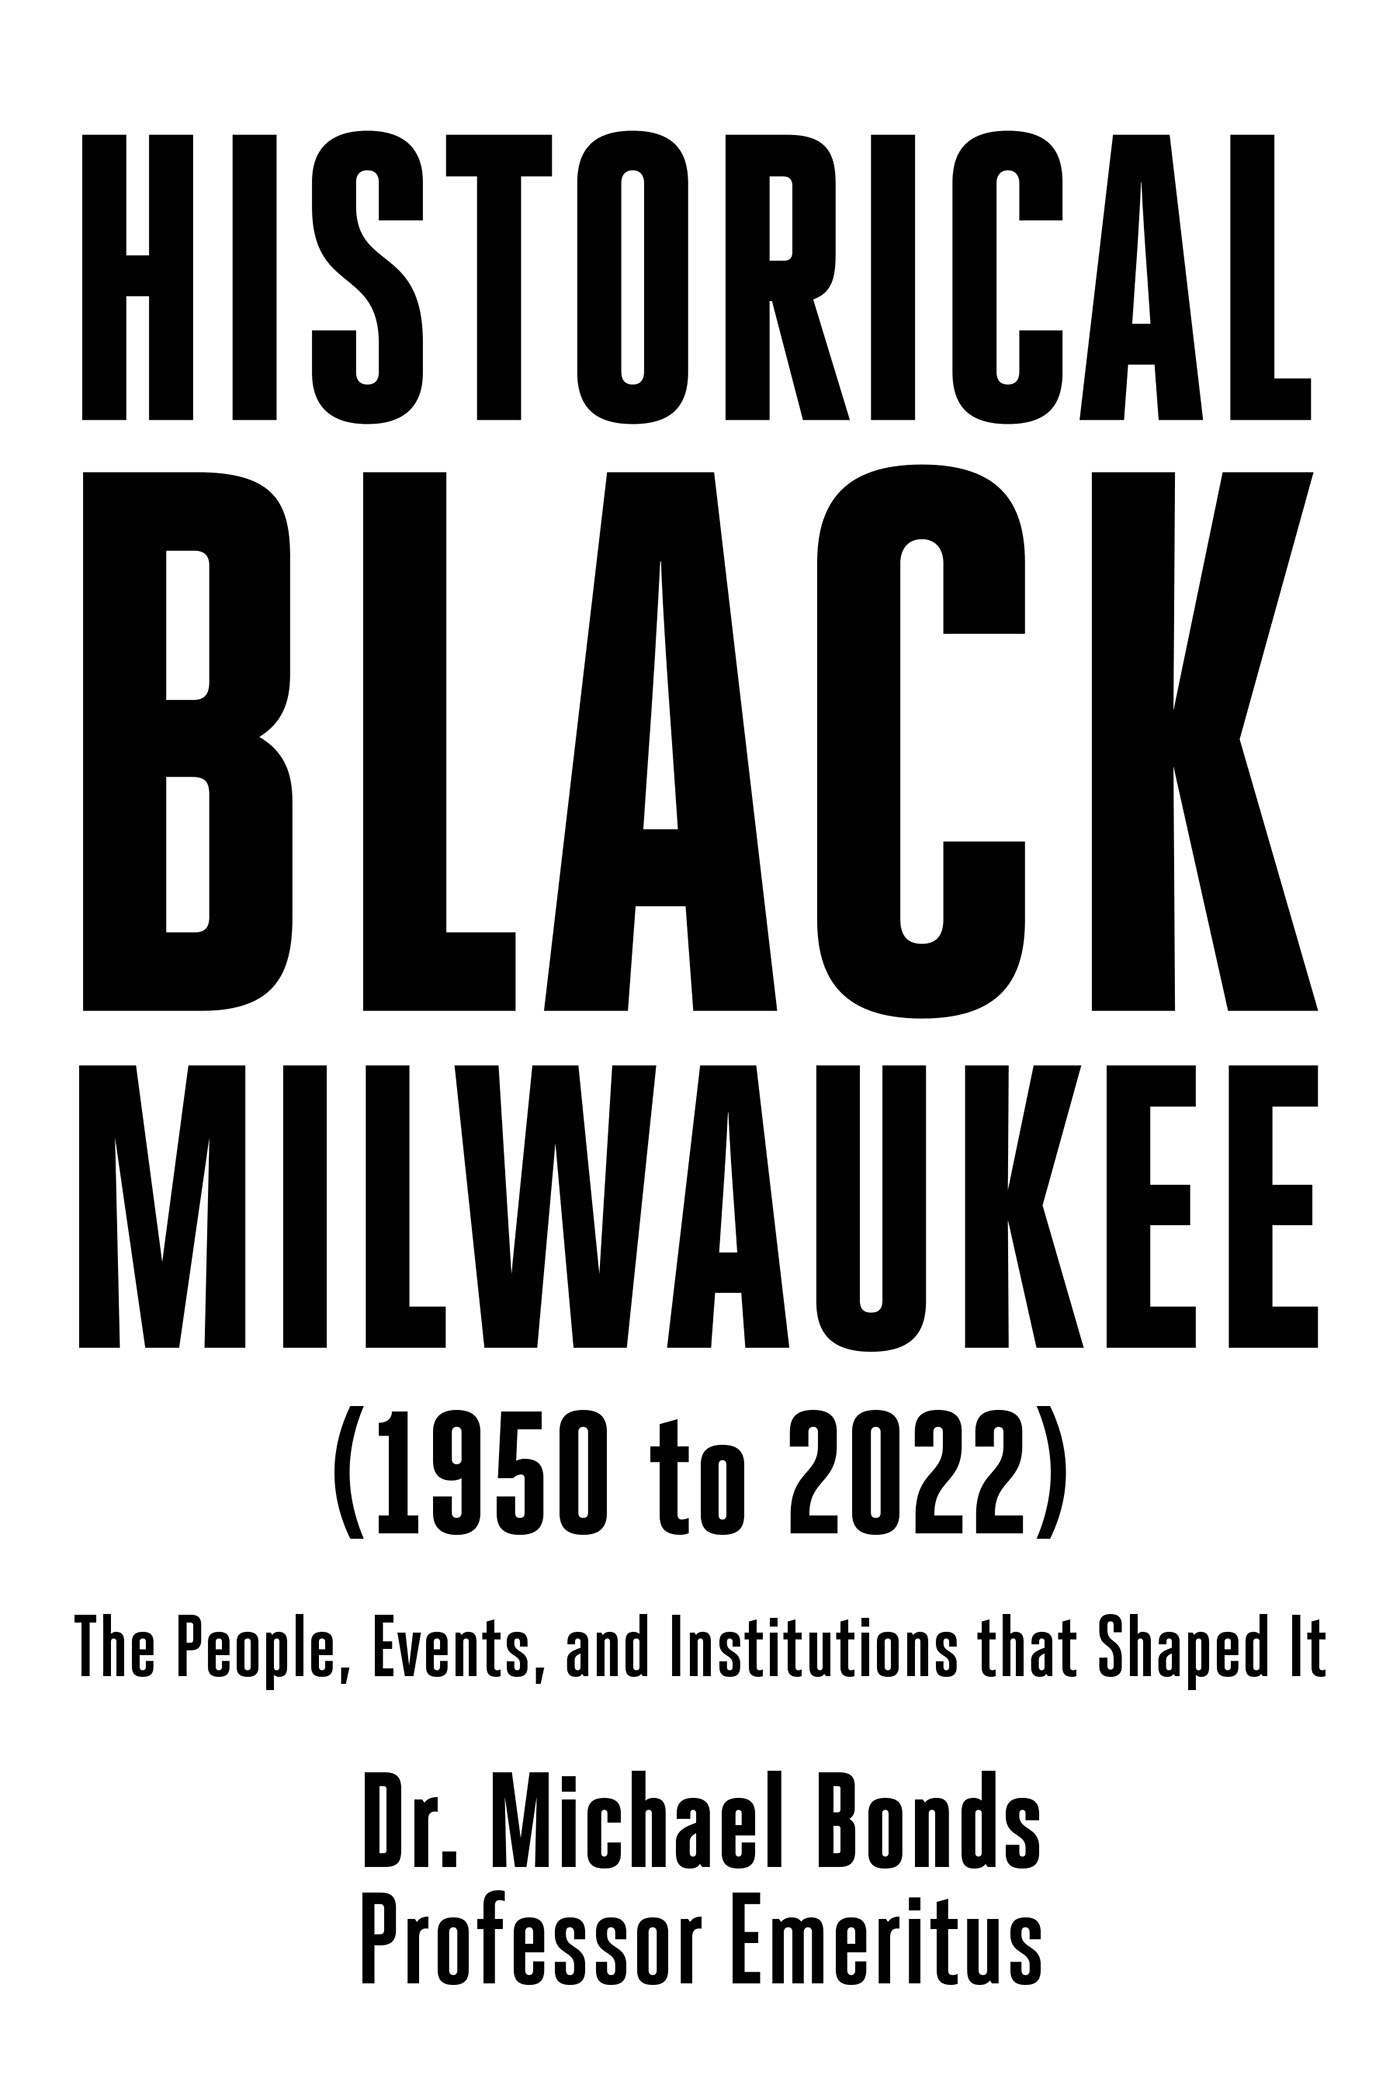 Dr. Michael Bonds’s Newly Released "Historical Black Milwaukee (1950 to 2022)" is an Insightful Study of a Key Component of Milwaukee’s History